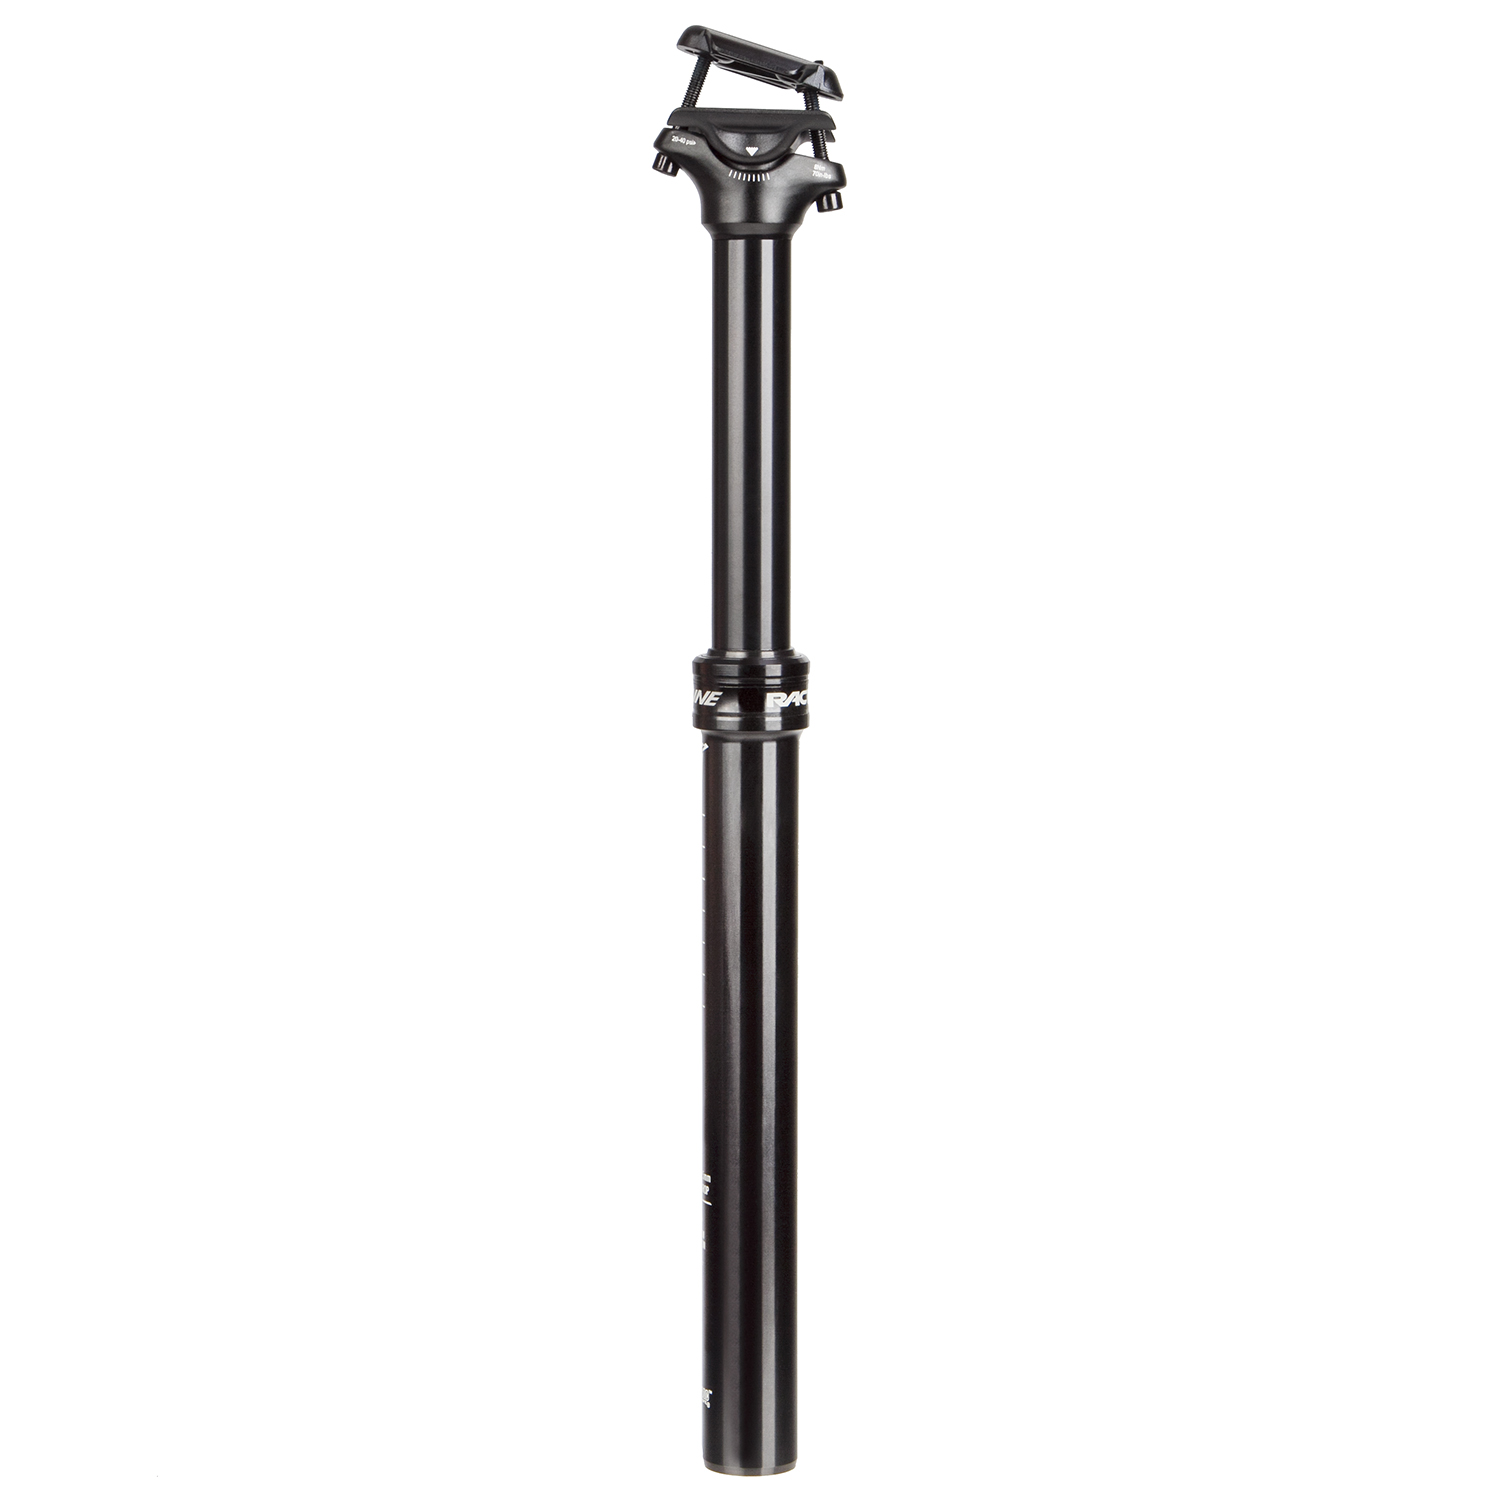 Race Face Seat Post Turbine Dropper Black, 30.9 x 415-125 mm, with Remote